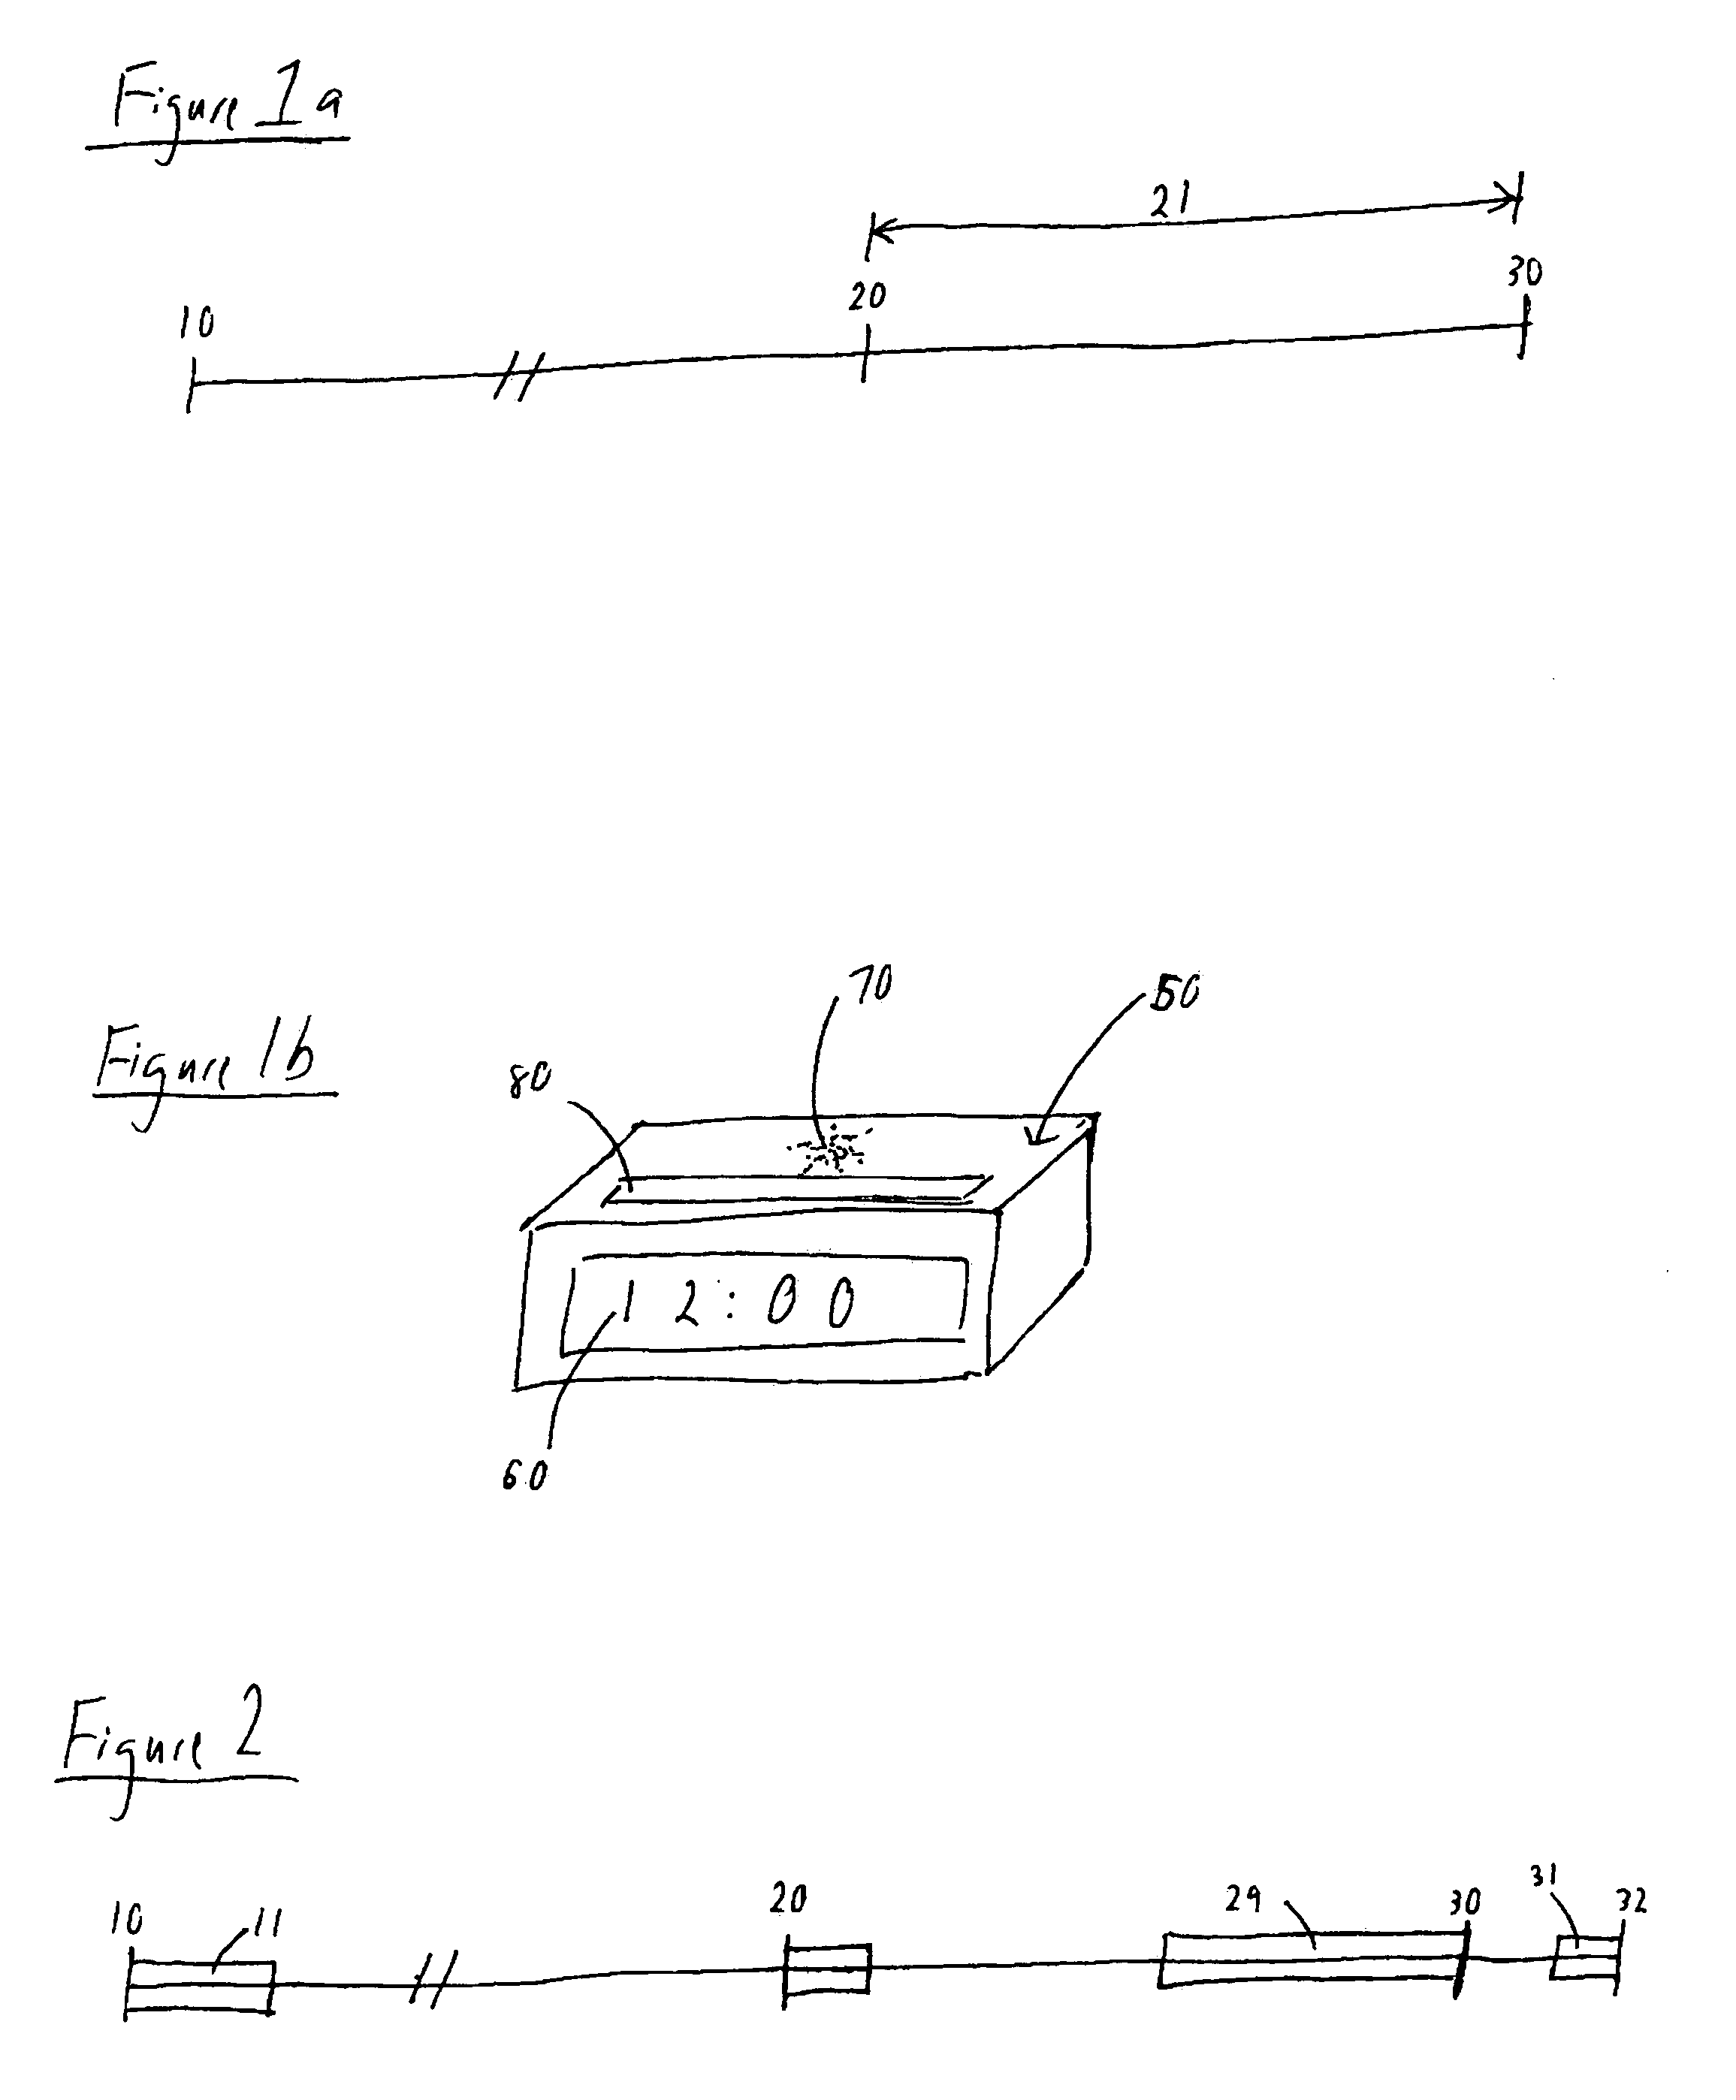 Alarm process and device